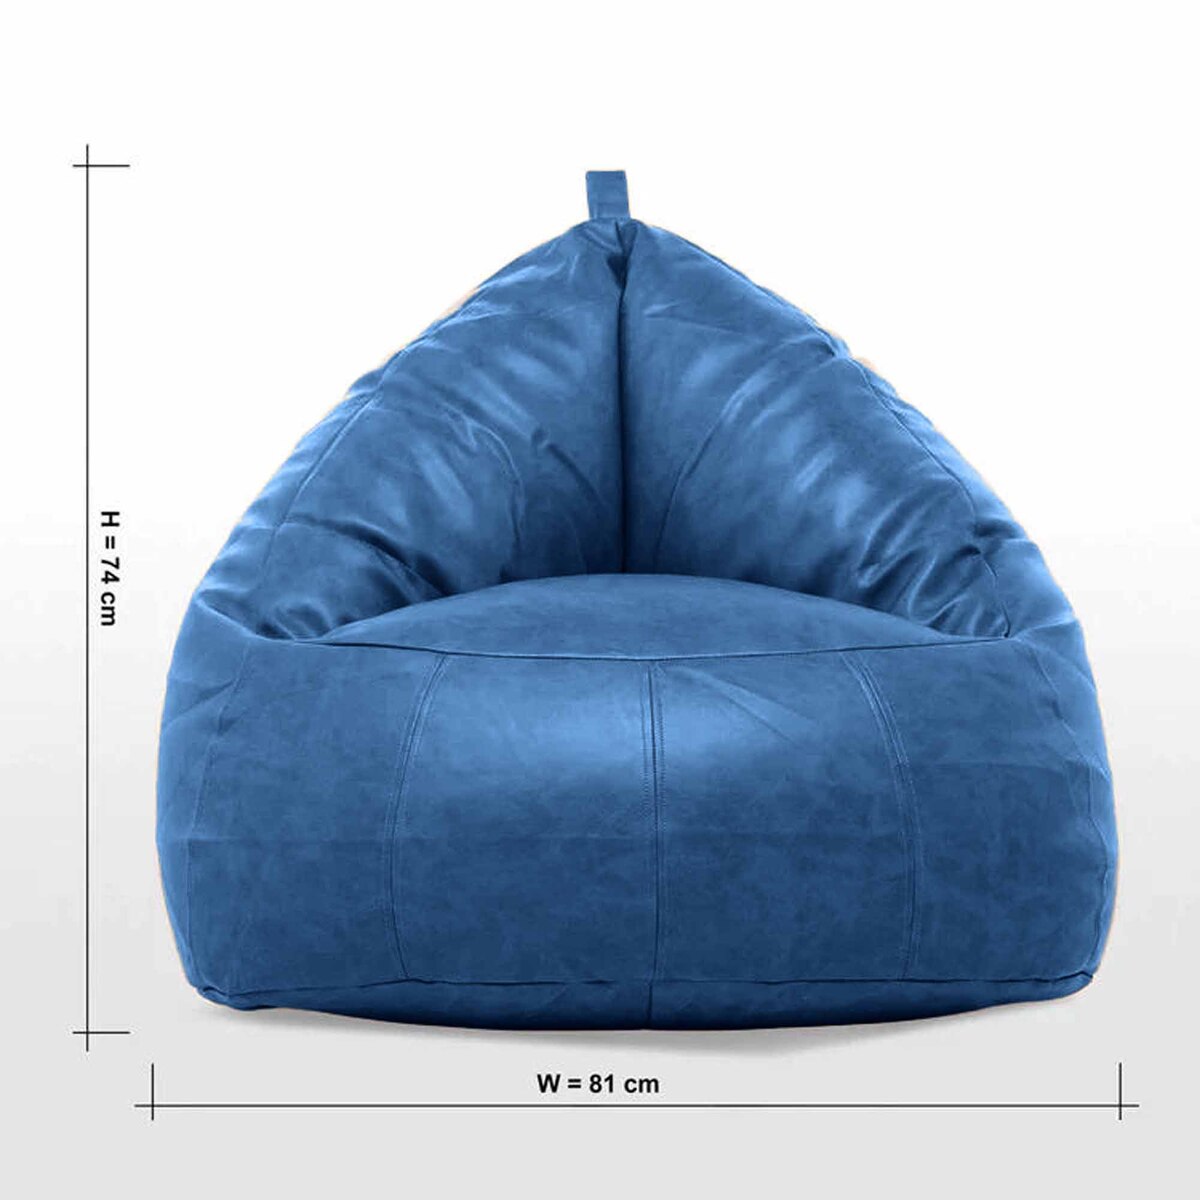 Cotton Home Luxury Leather Chair Blue 78x81x74cm